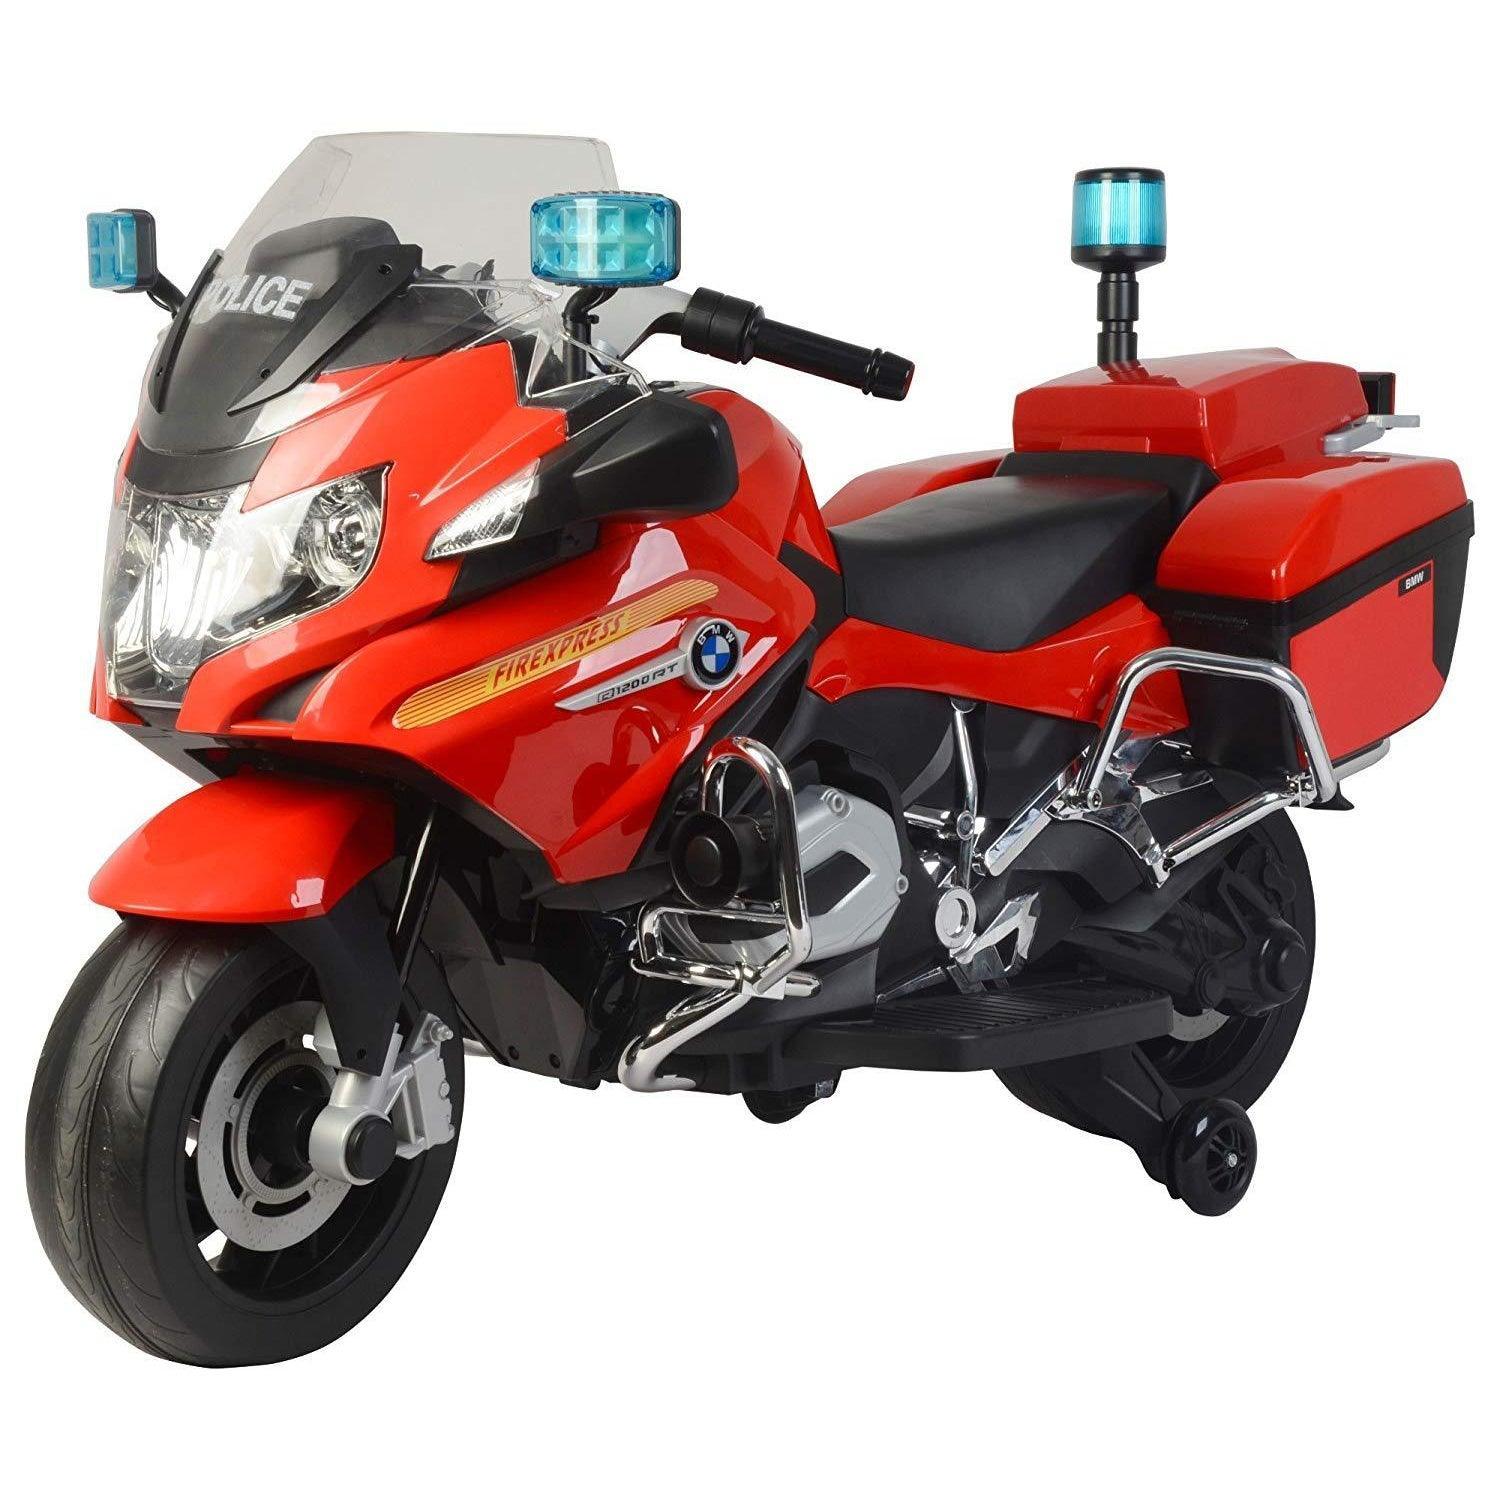 PATOYS | Chilokbo Officially Licensed BMW 212 Police bike R 1200 RT Motorcycle Battery Operated Ride-on Bike for Kids up to 7 years Red Ride on Bike Chi Lok Bo